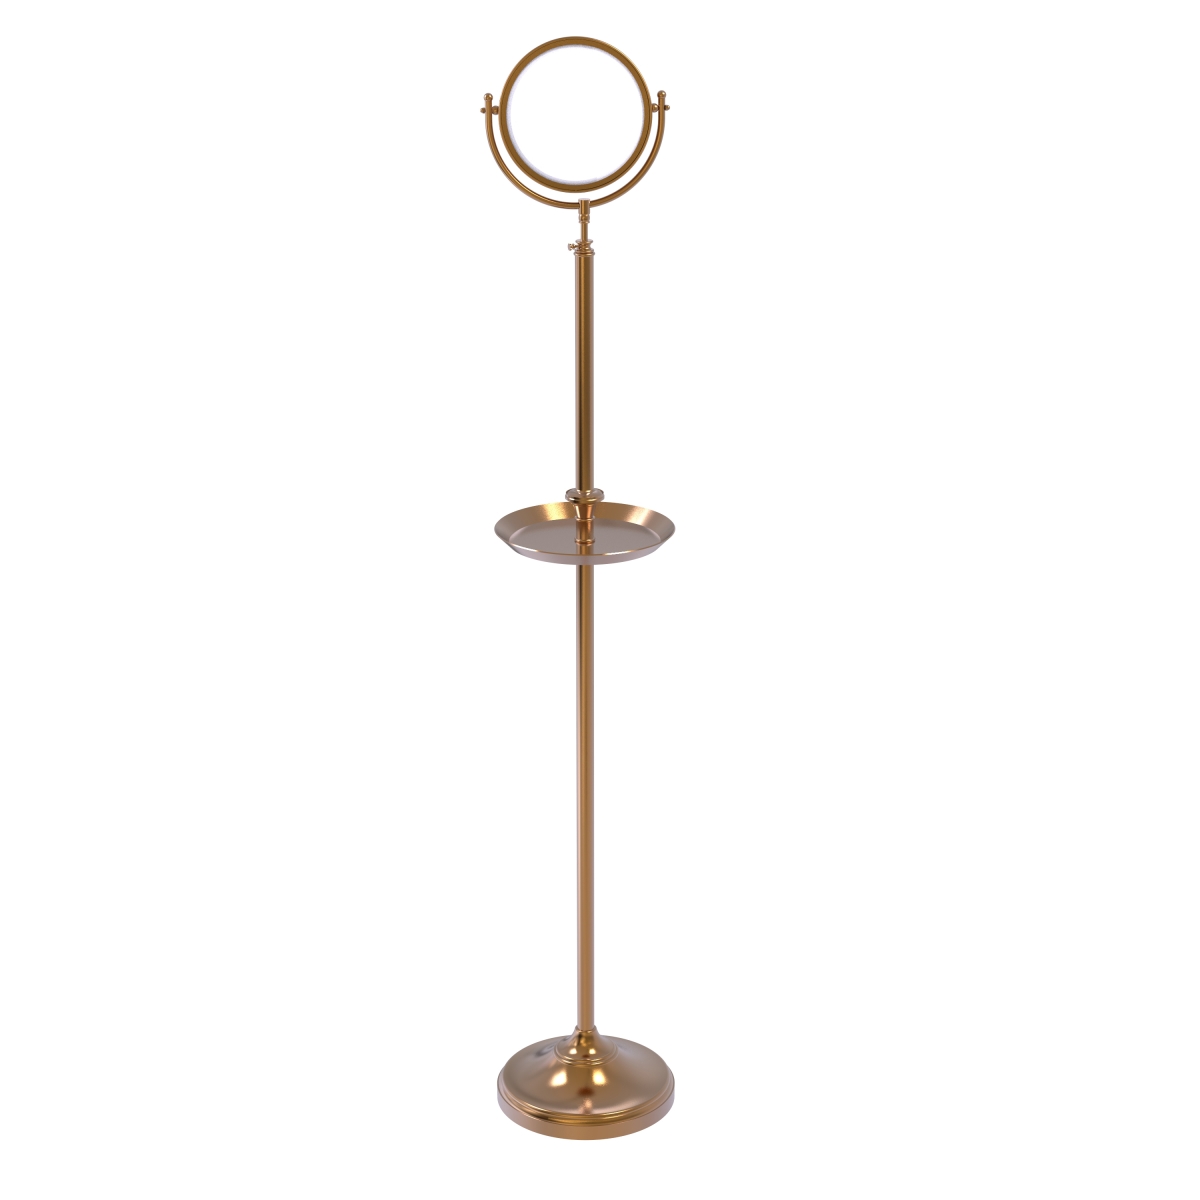 DMF-3-4X-BBR Floor Standing Make-Up Mirror 8 in. dia. with 4X Magnification & Shaving Tray, Brushed Bronze -  Allied Brass, DMF-3/4X-BBR